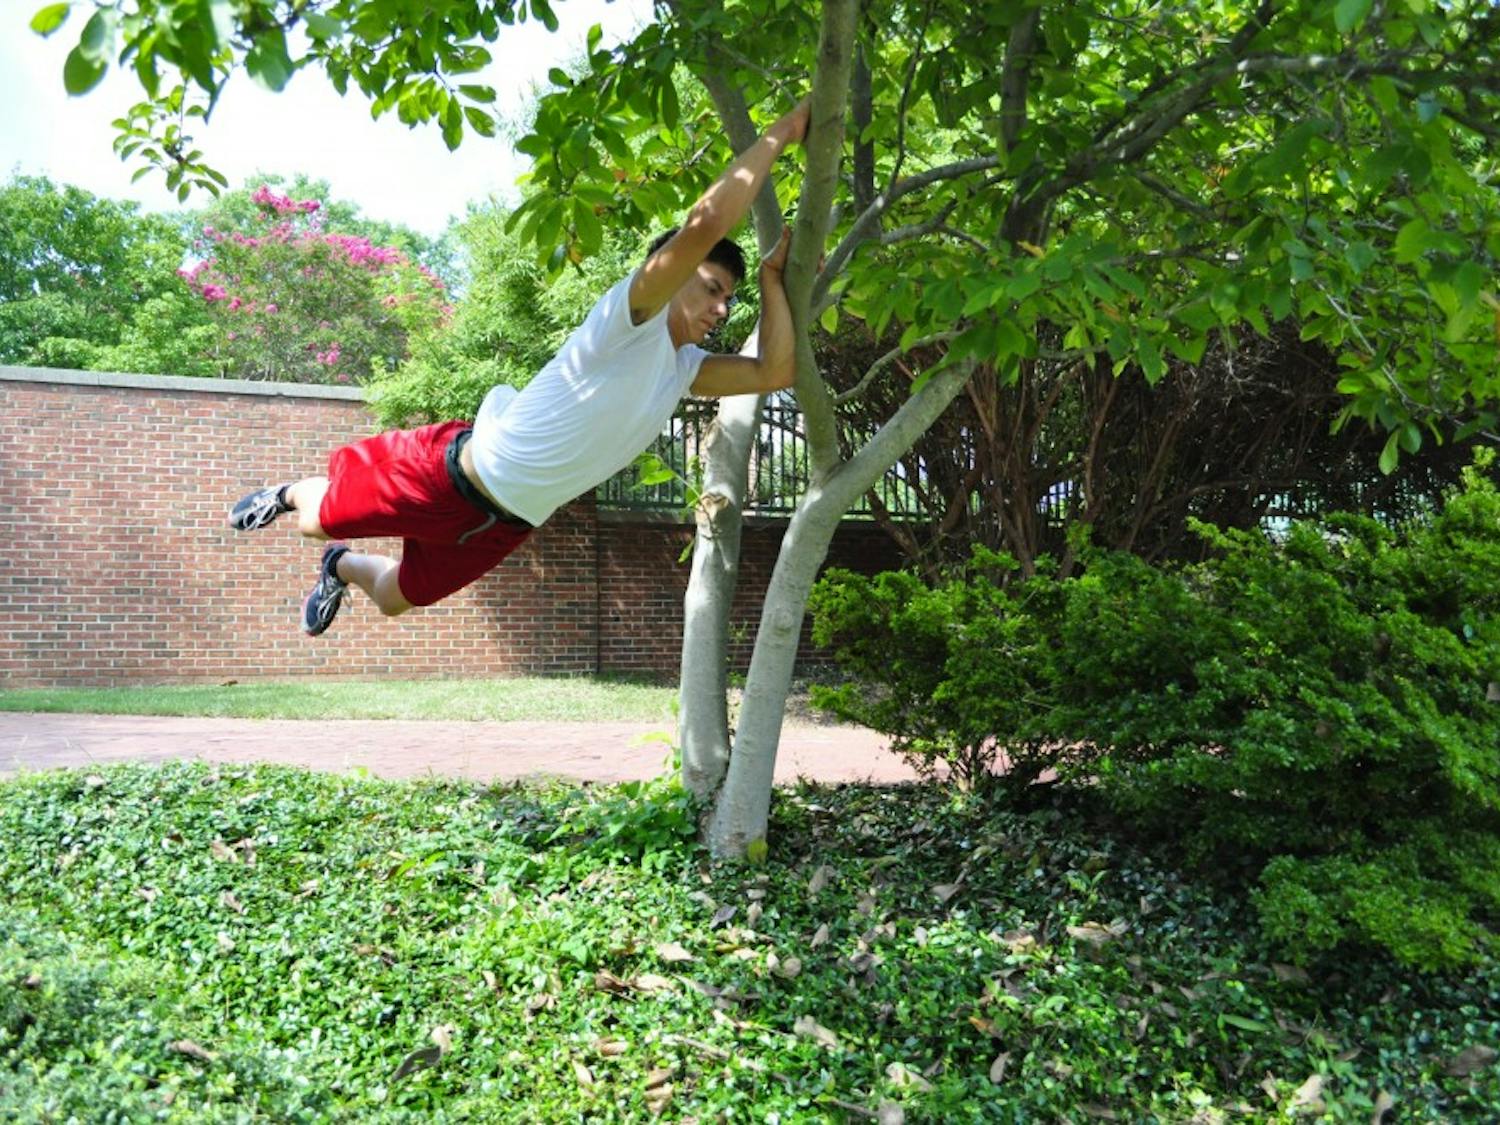 	Will Long doing a laches (pronounced lashay) off of a tree branch